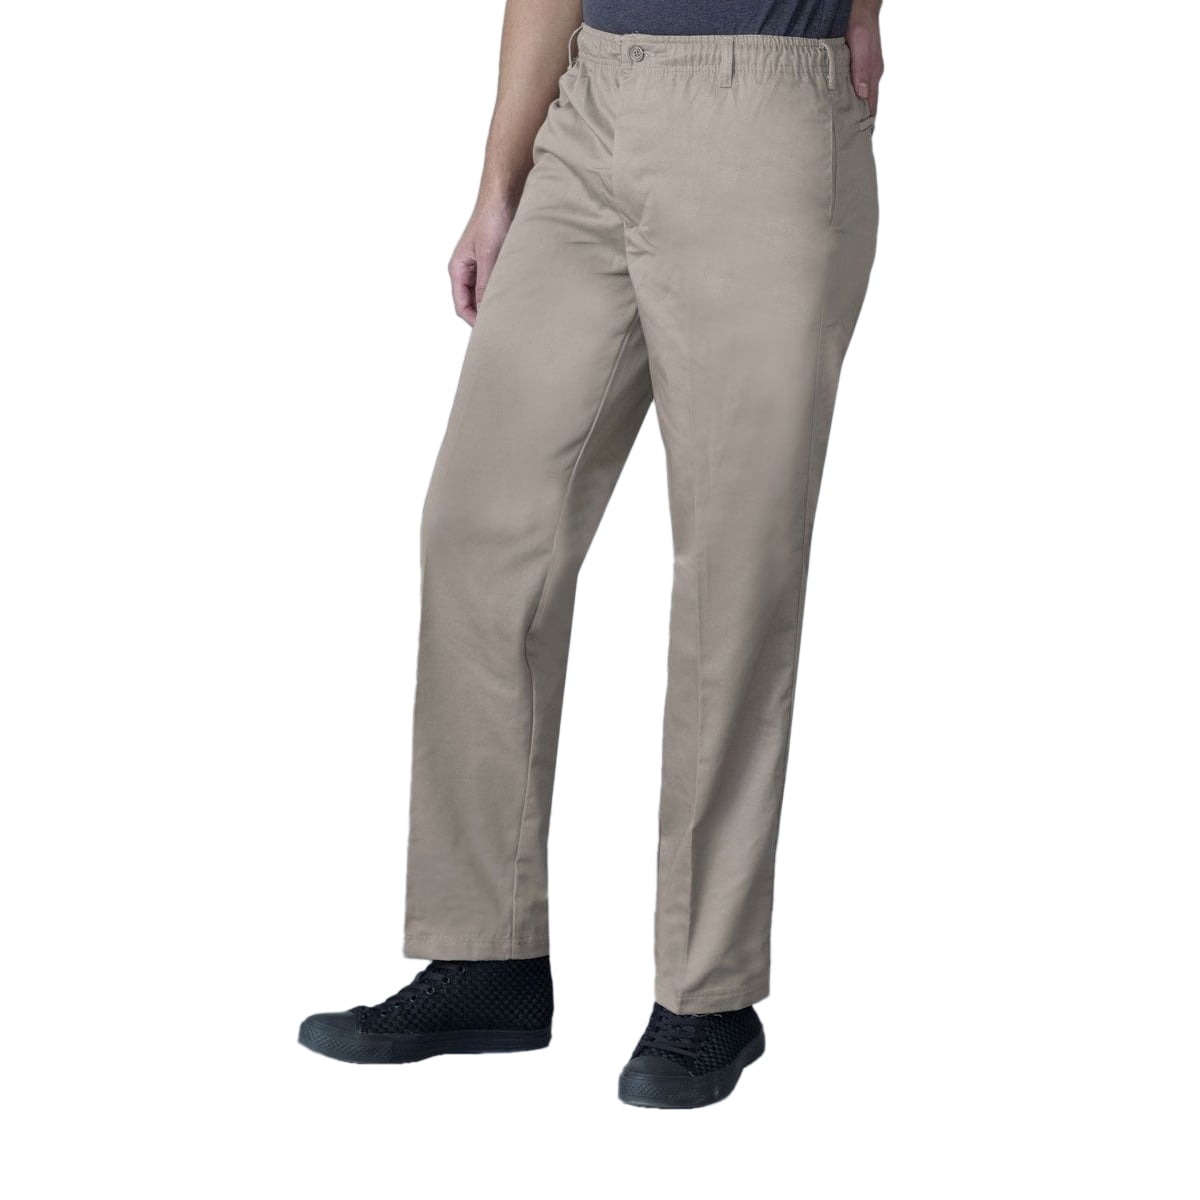 Duke D555 King Size Big Tall Basilio Mens Rugby Trousers Button Up Chino Pants 